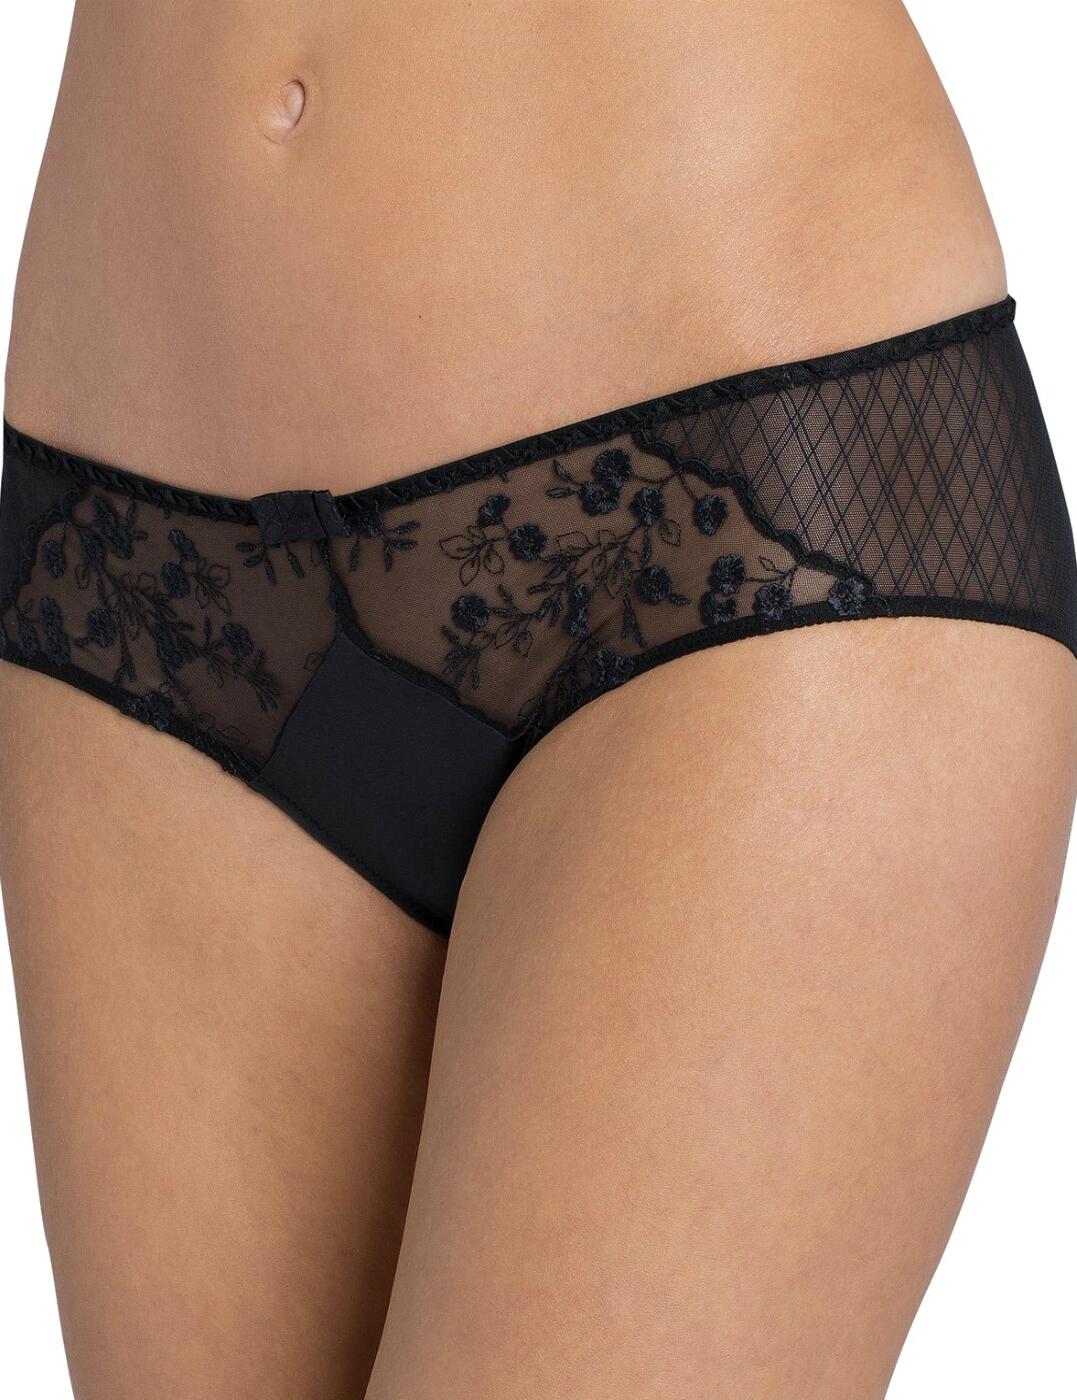 10154562 Triumph Beauty-Full Couture Hipster Brief - 10154562 Black